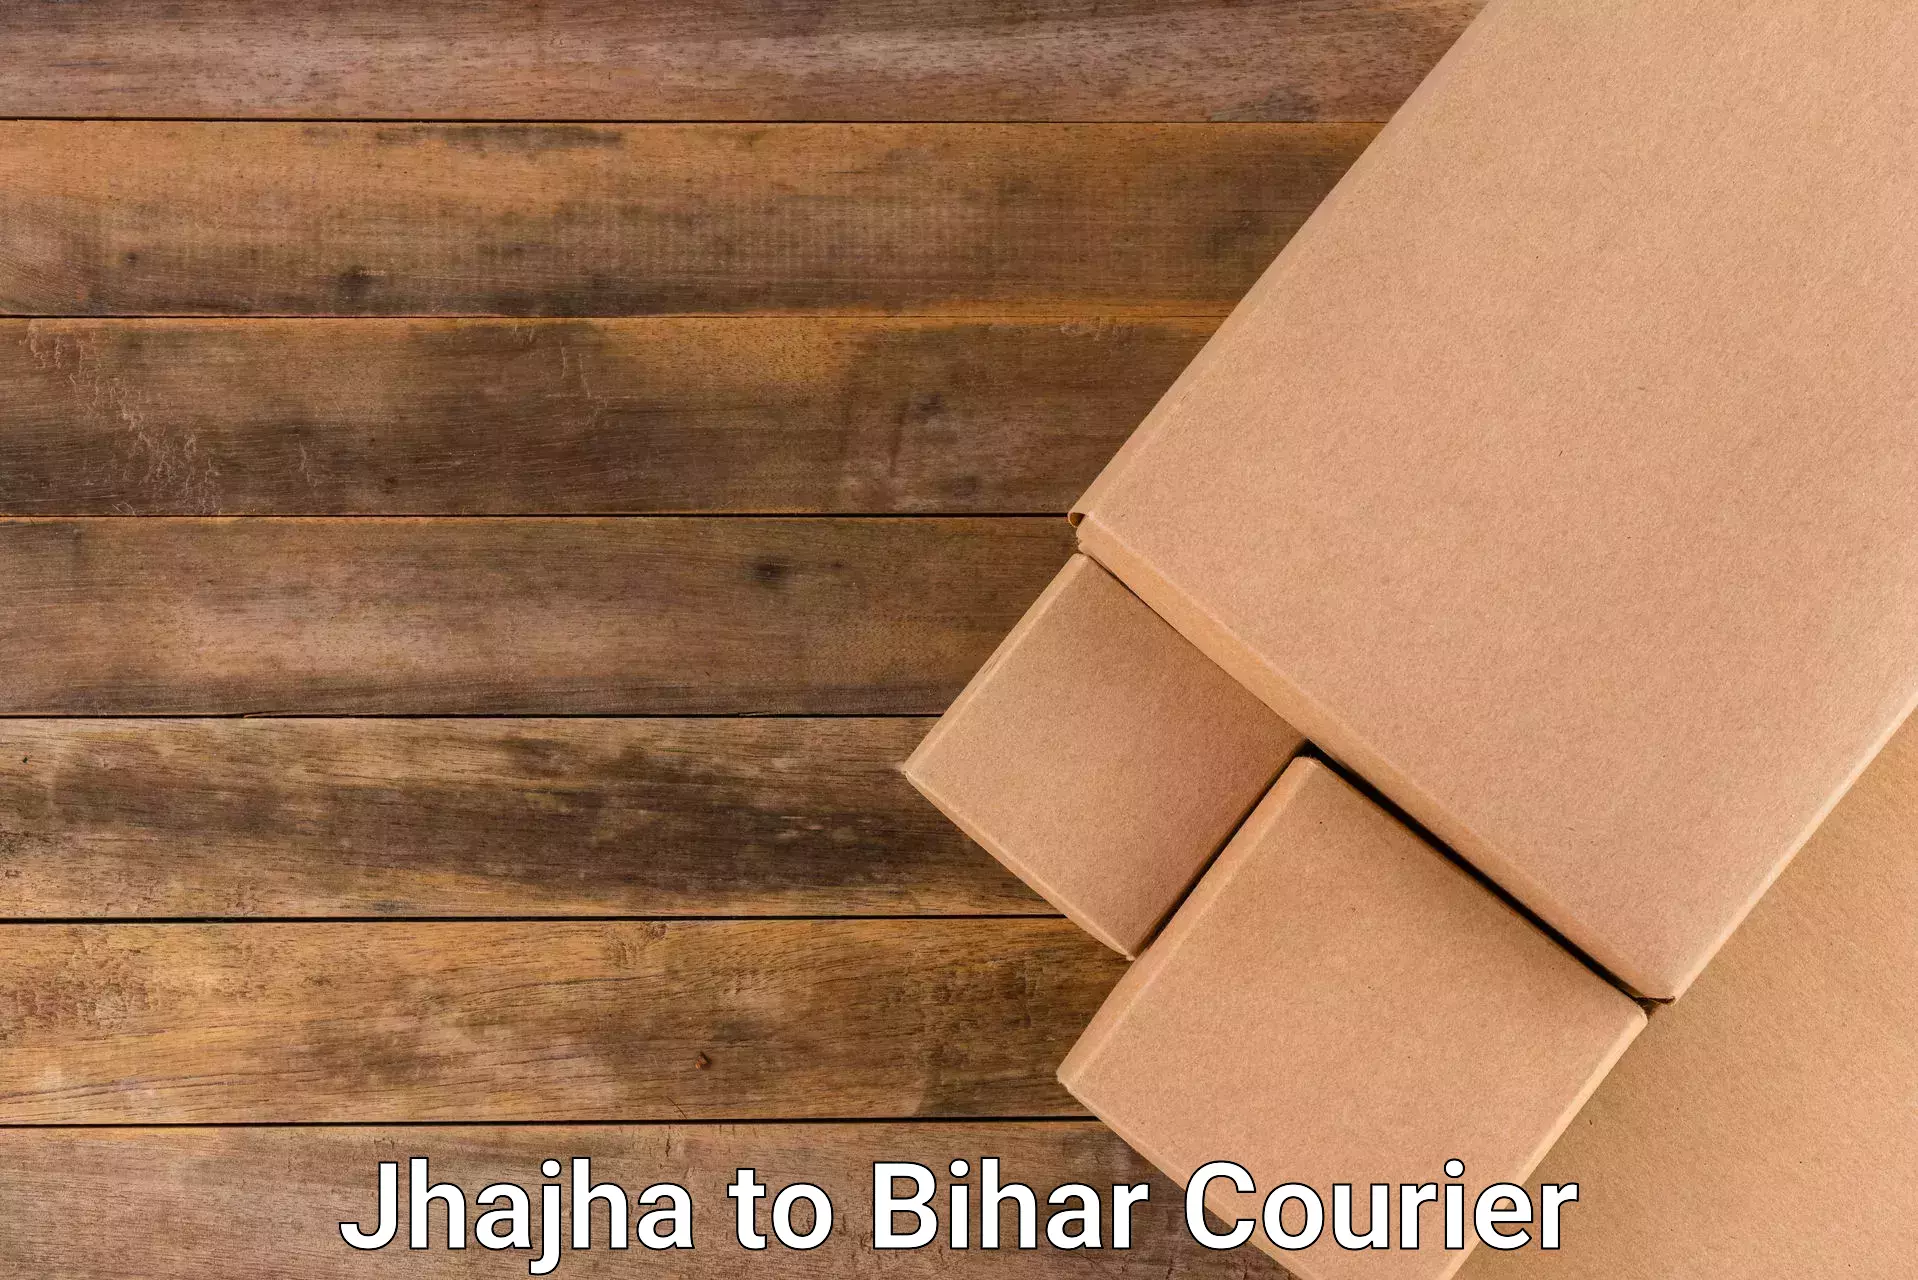 Cash on delivery service Jhajha to Bihar